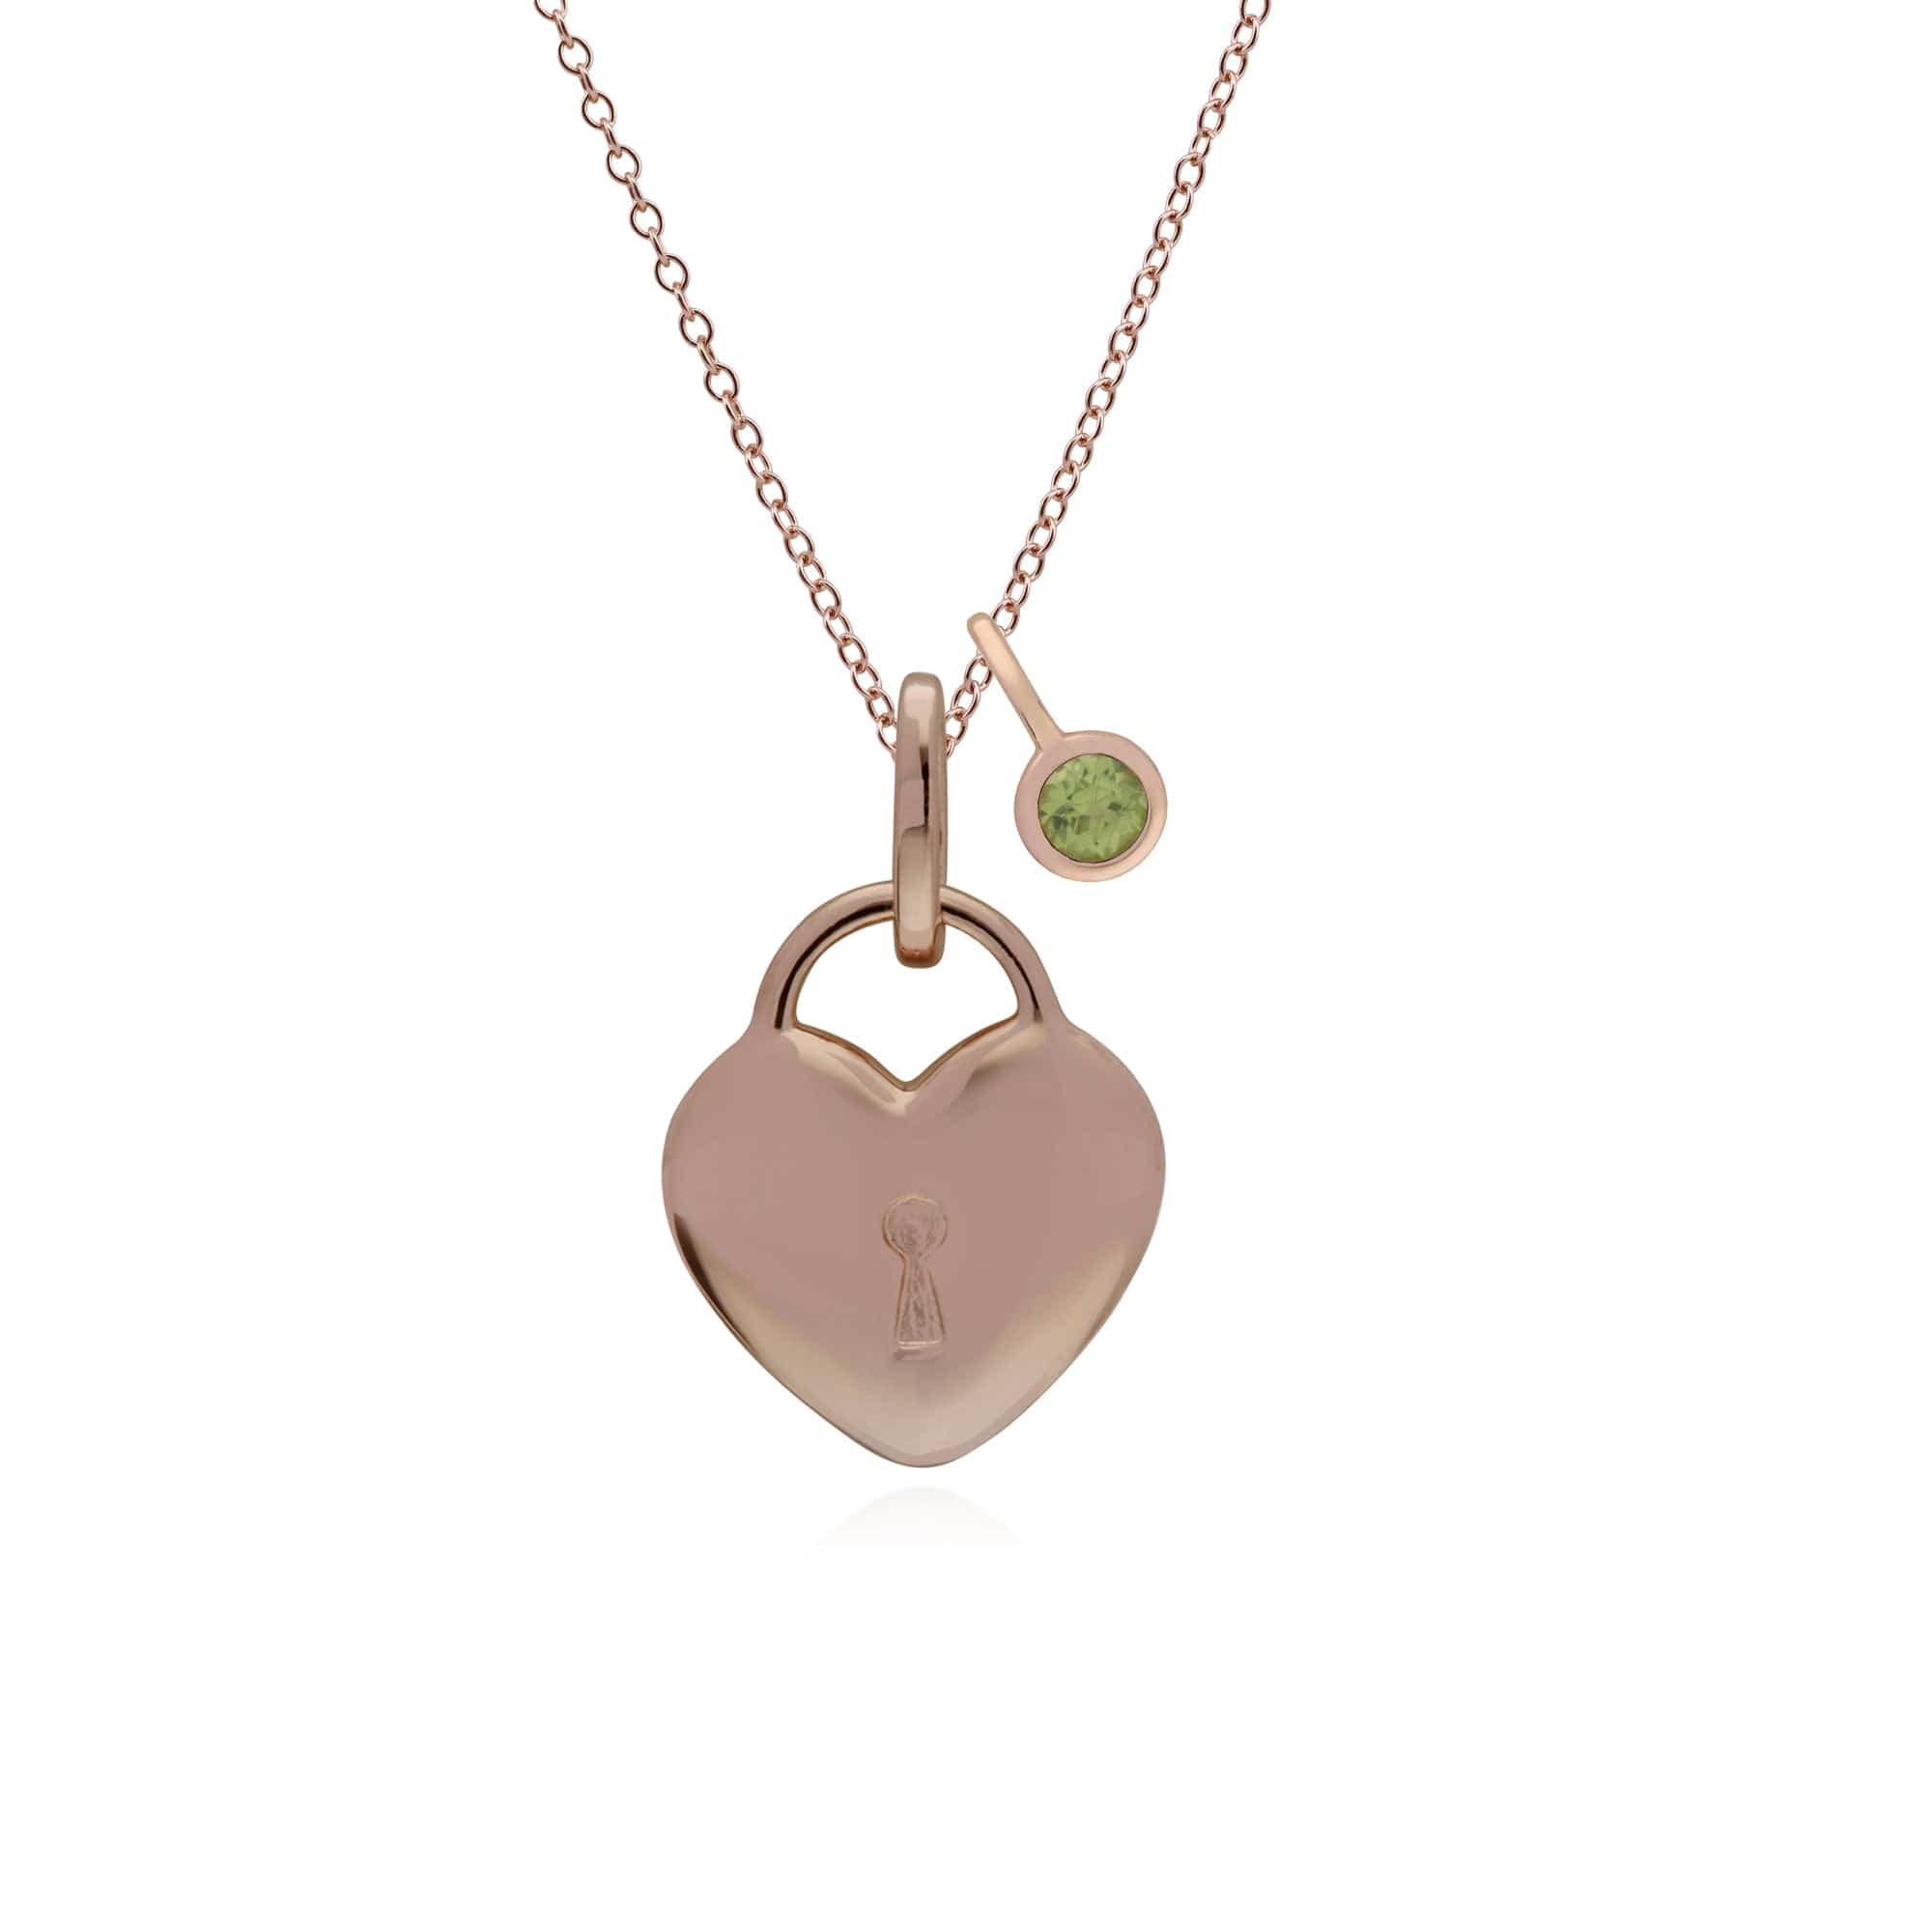 270P027305925-270P026901925 Classic Heart Lock Pendant & Peridot Charm in Rose Gold Plated 925 Sterling Silver 1